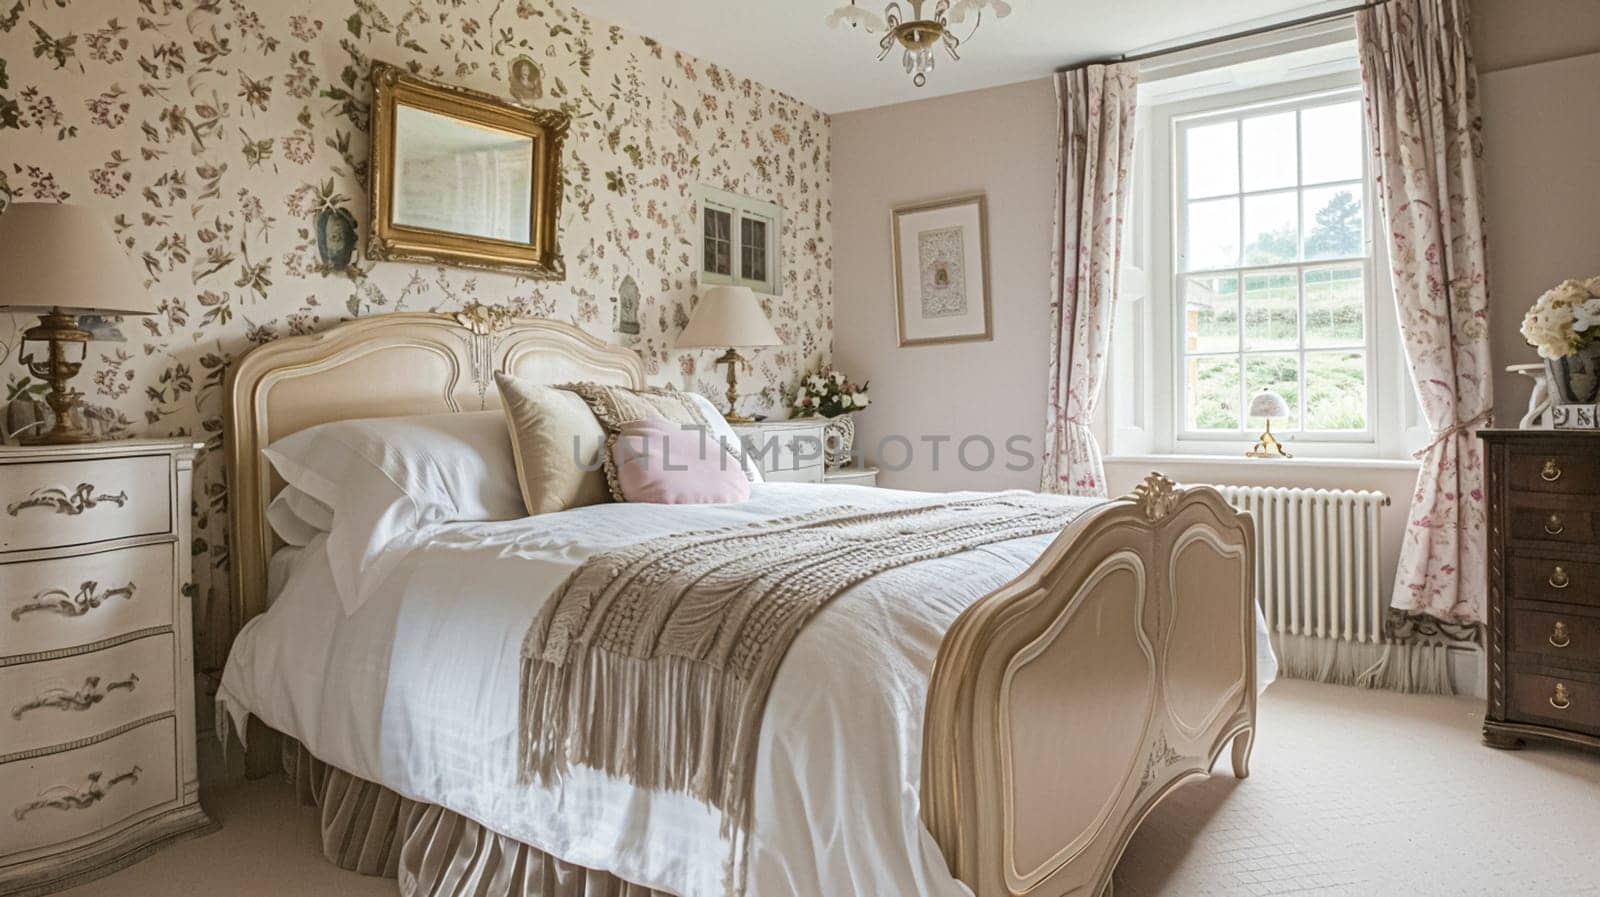 Bedroom decor in Edwardian manor house, interior design and home decor, bed with elegant bedding and bespoke furniture, English country house, holiday rental and cottage style by Anneleven